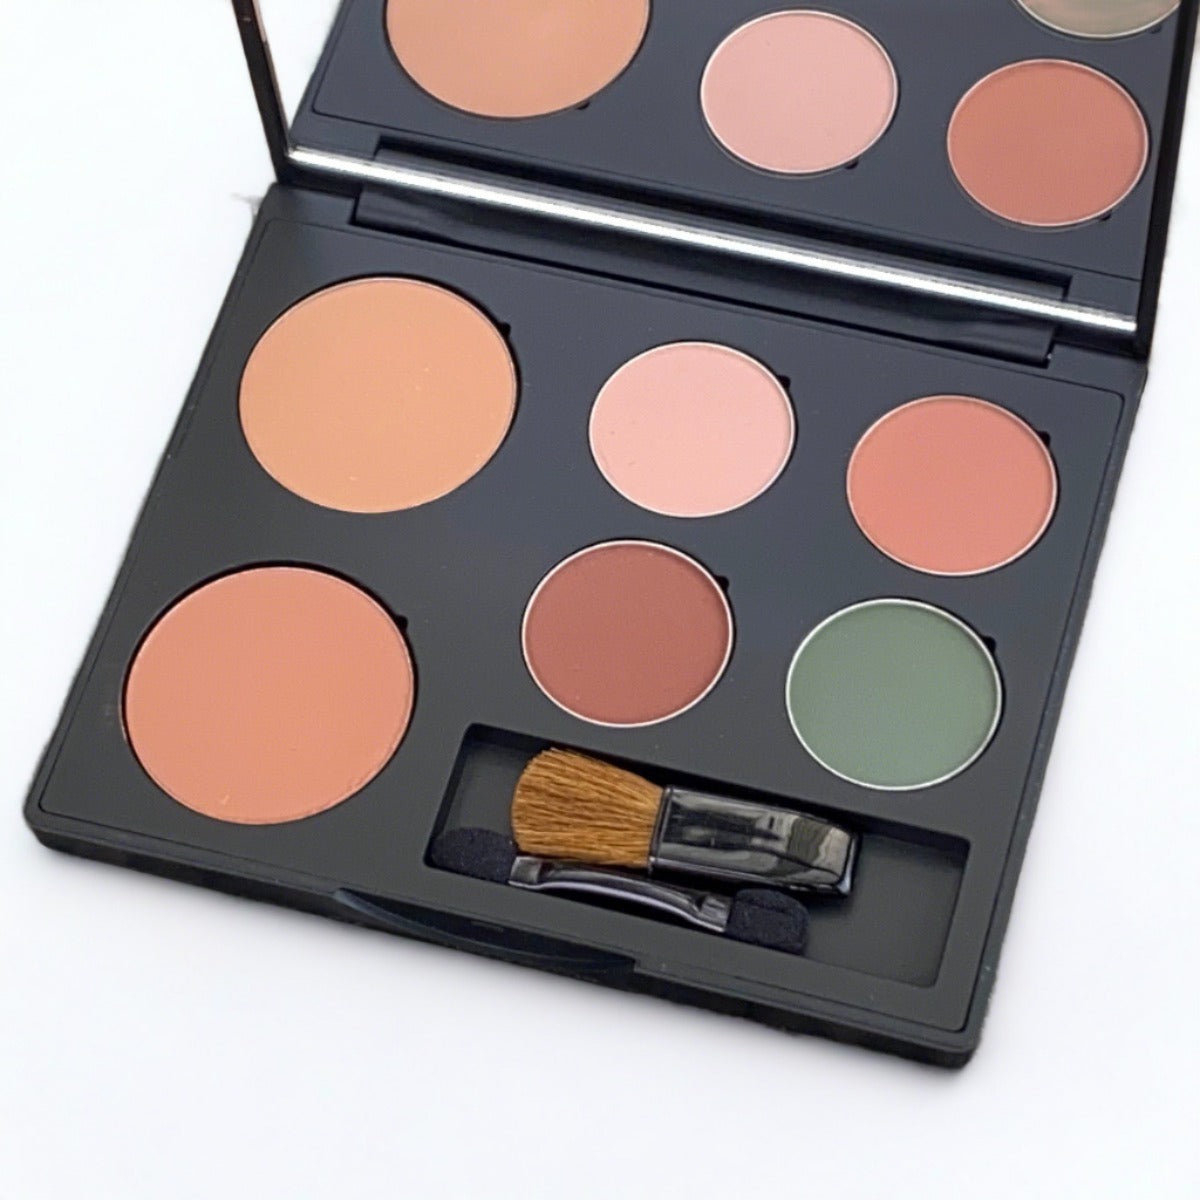 Warm palette with four eyeshadows and two blush pans for warm skin tones